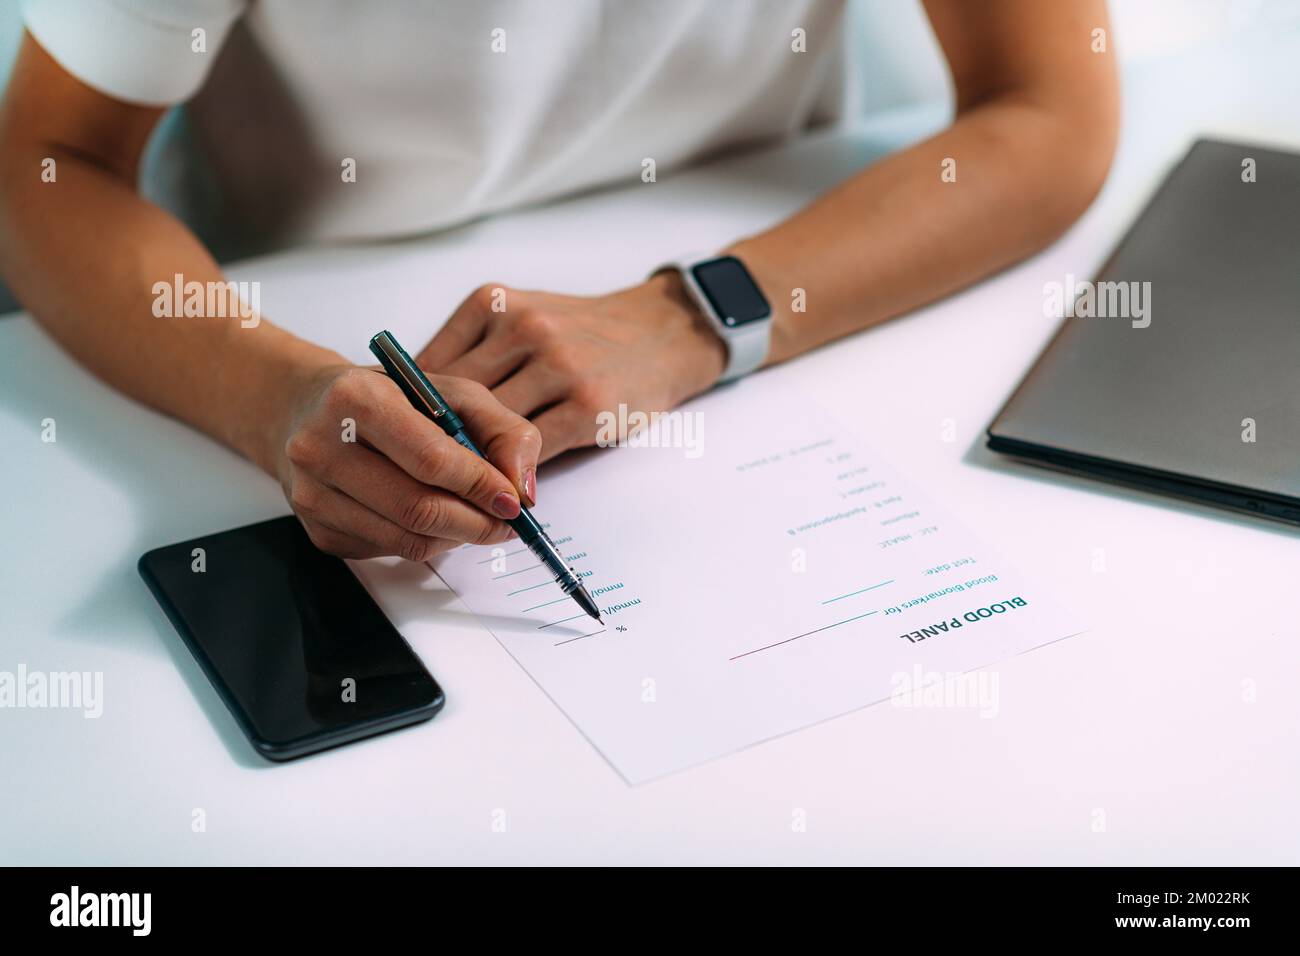 Woman writing down blood test results on a form using her smartphone. Stock Photo